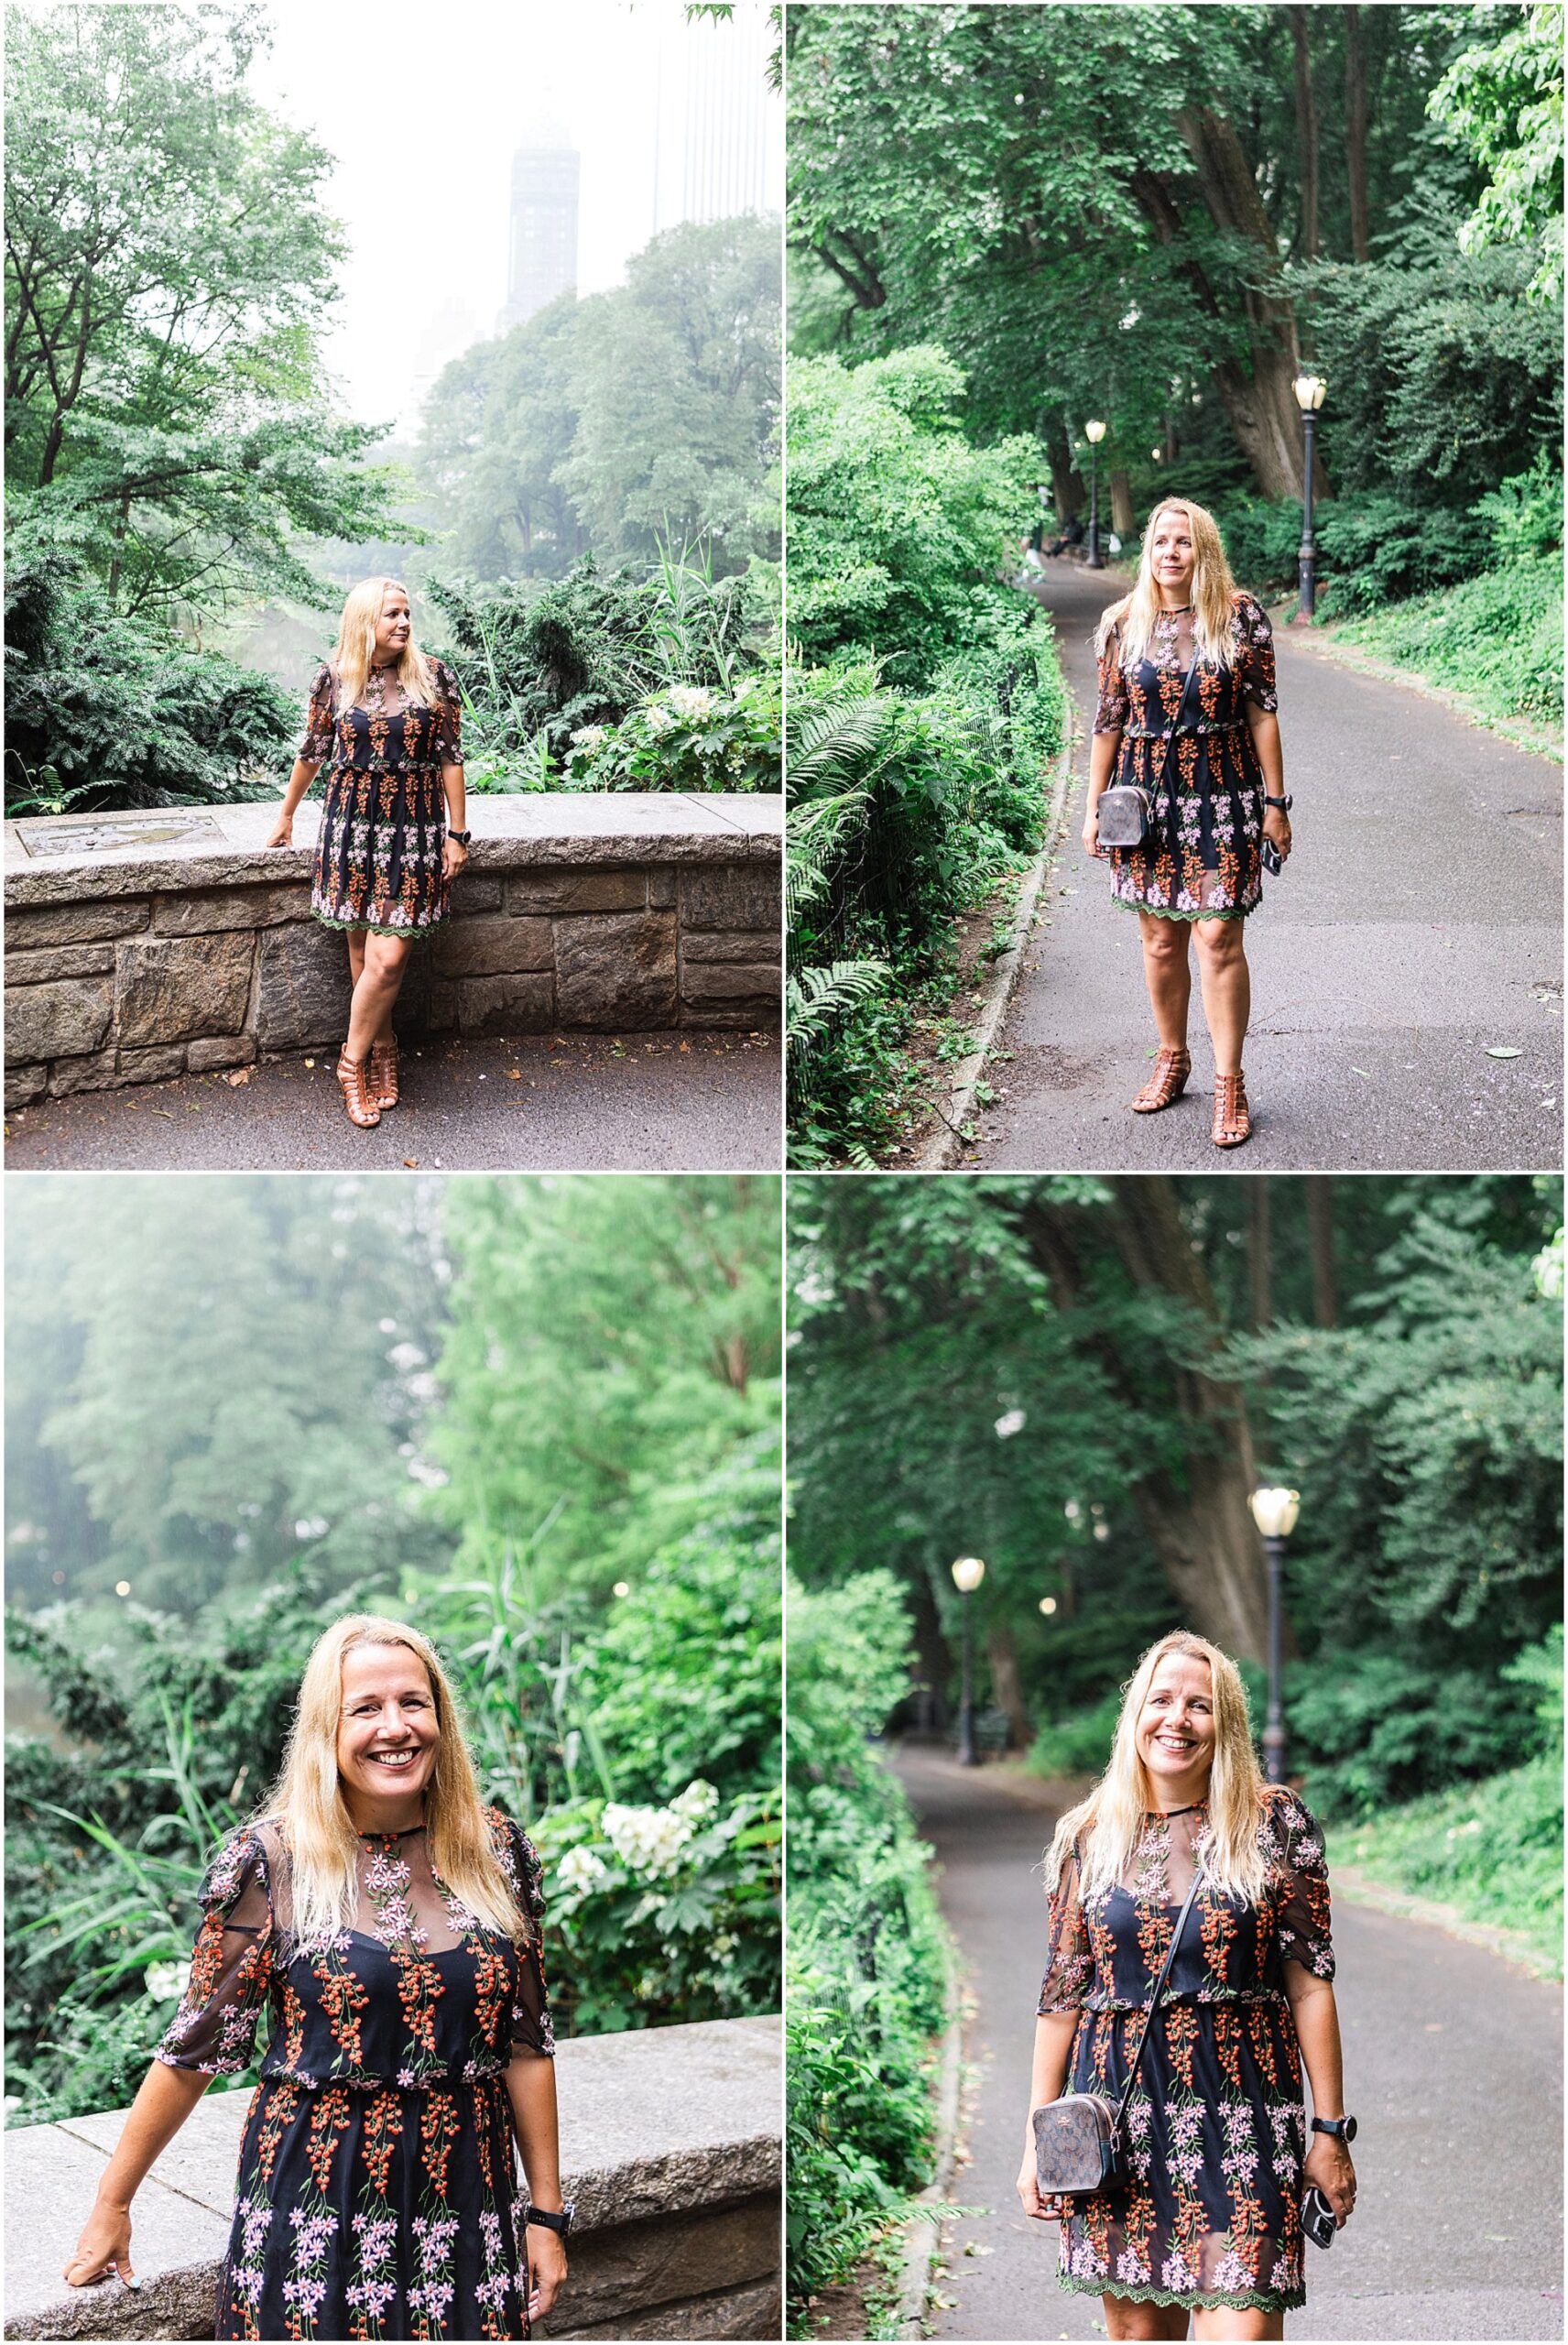 SEO Expert Claire Taylor is stood in Central Park for her New York Brand Shoot wearing a patterned shift dress. Image by London brand photographer AKP Branding Stories